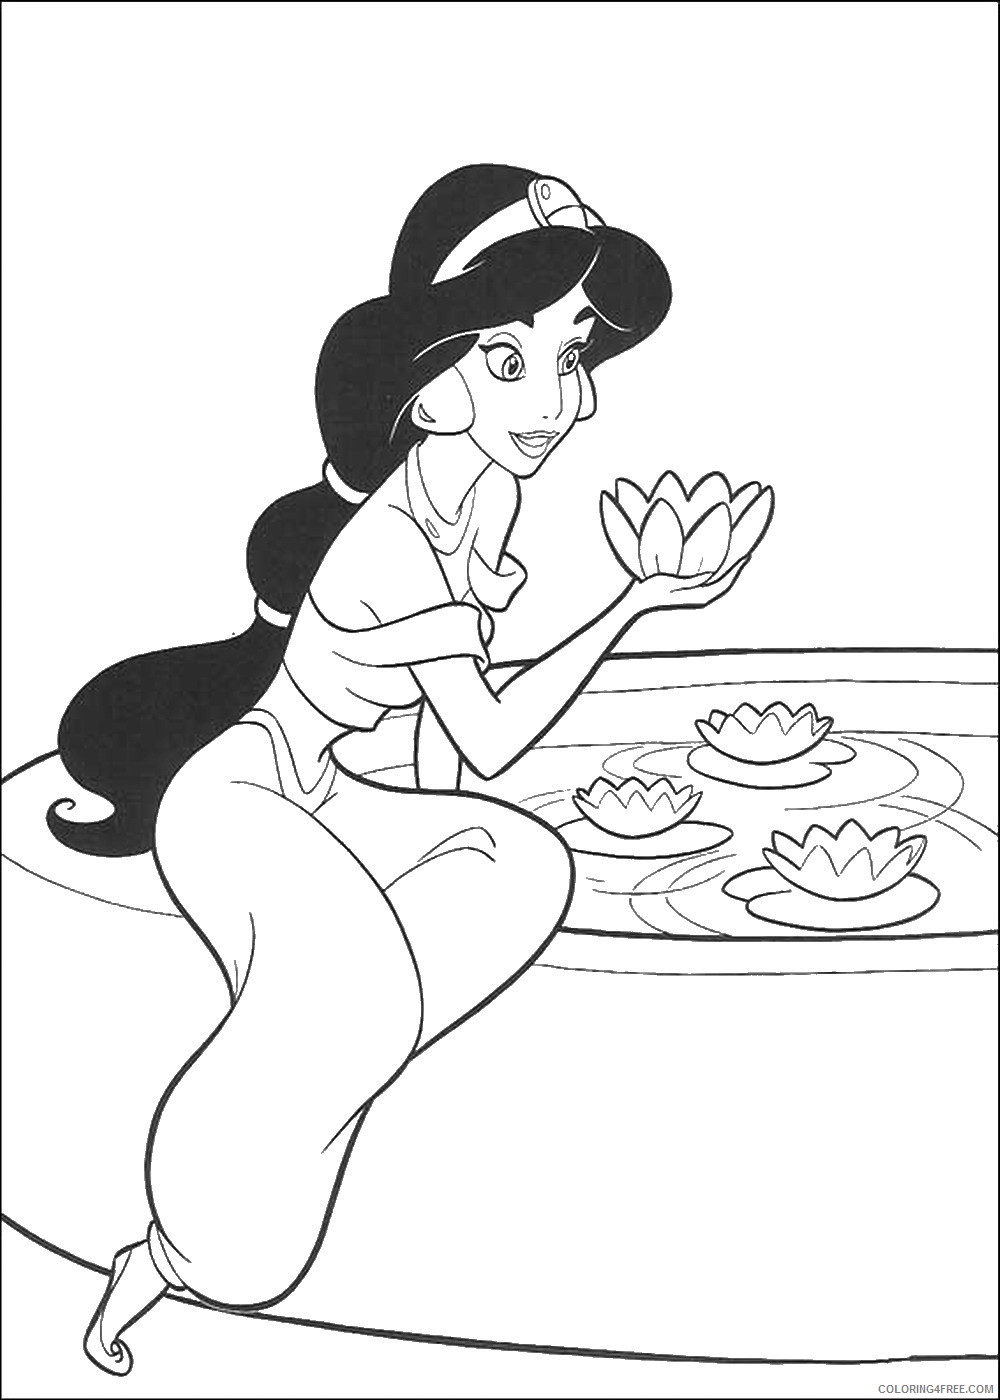 Aladdin Coloring Pages Cartoons aladdin_14 Printable 2020 0292 Coloring4free